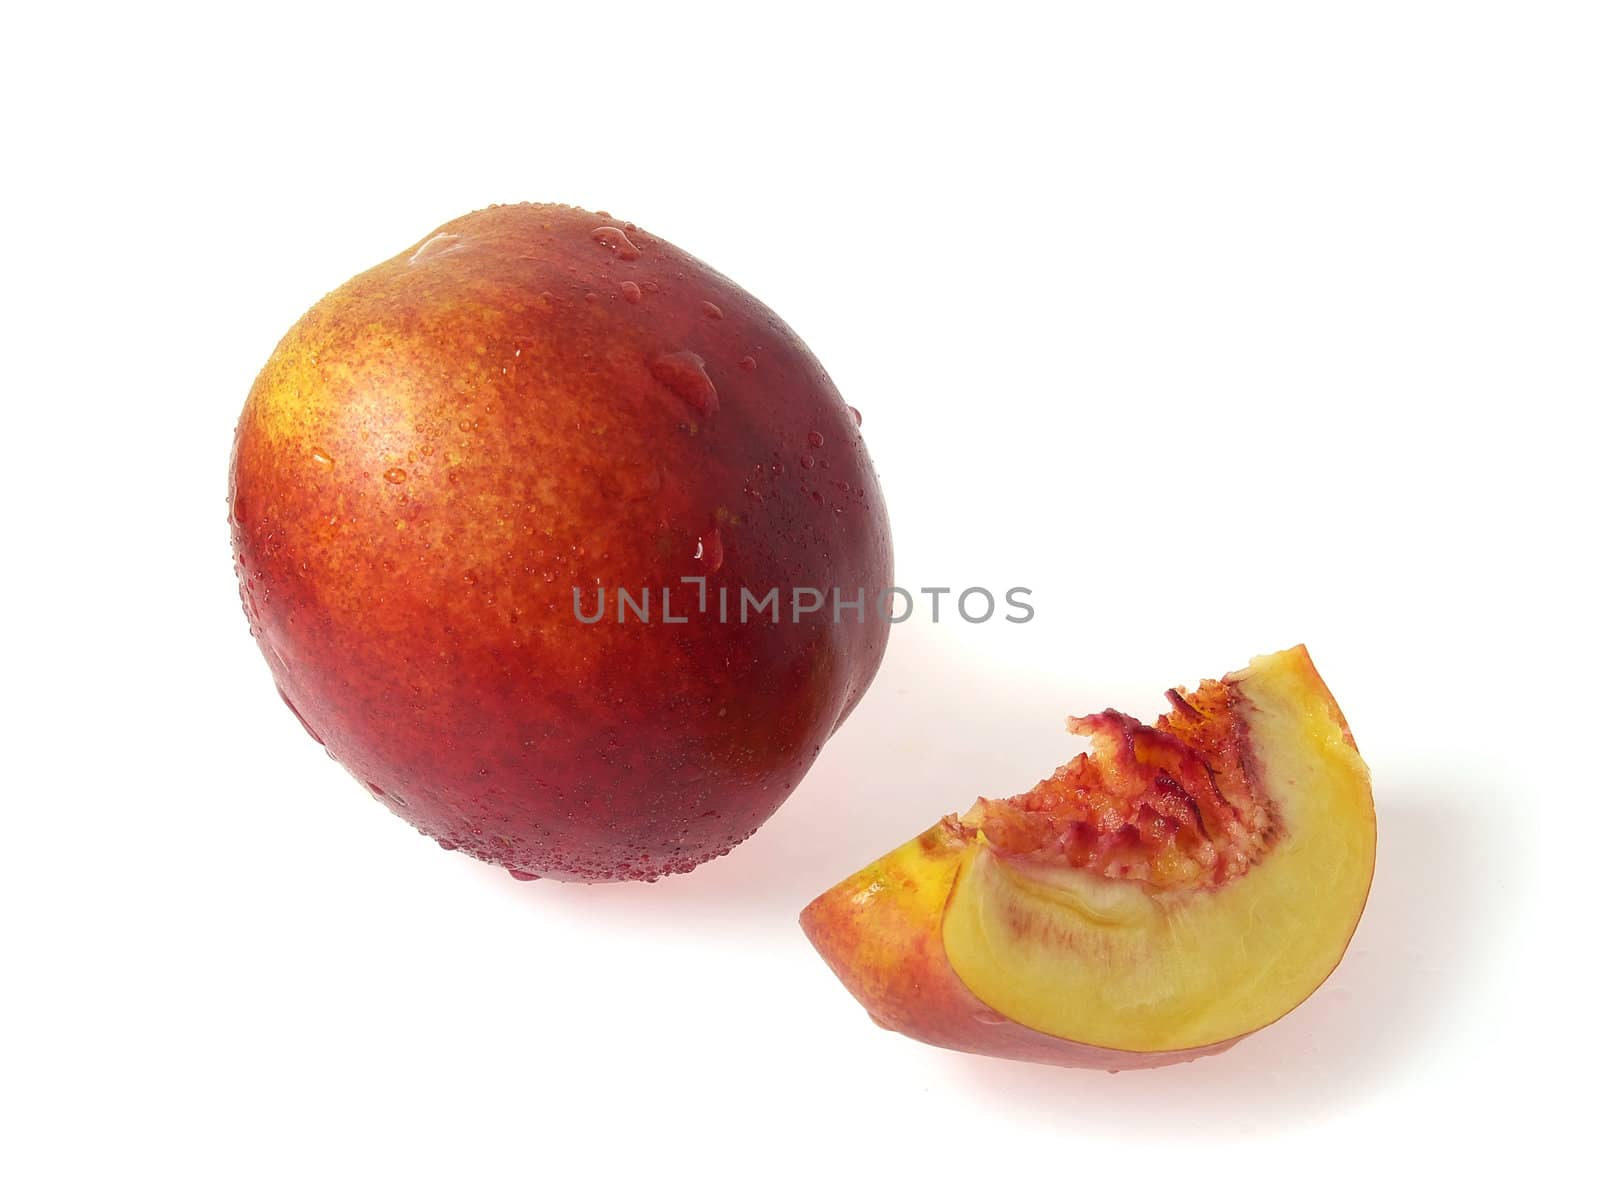 Tasty juicy pieces of nectarine on a white background with water droplets